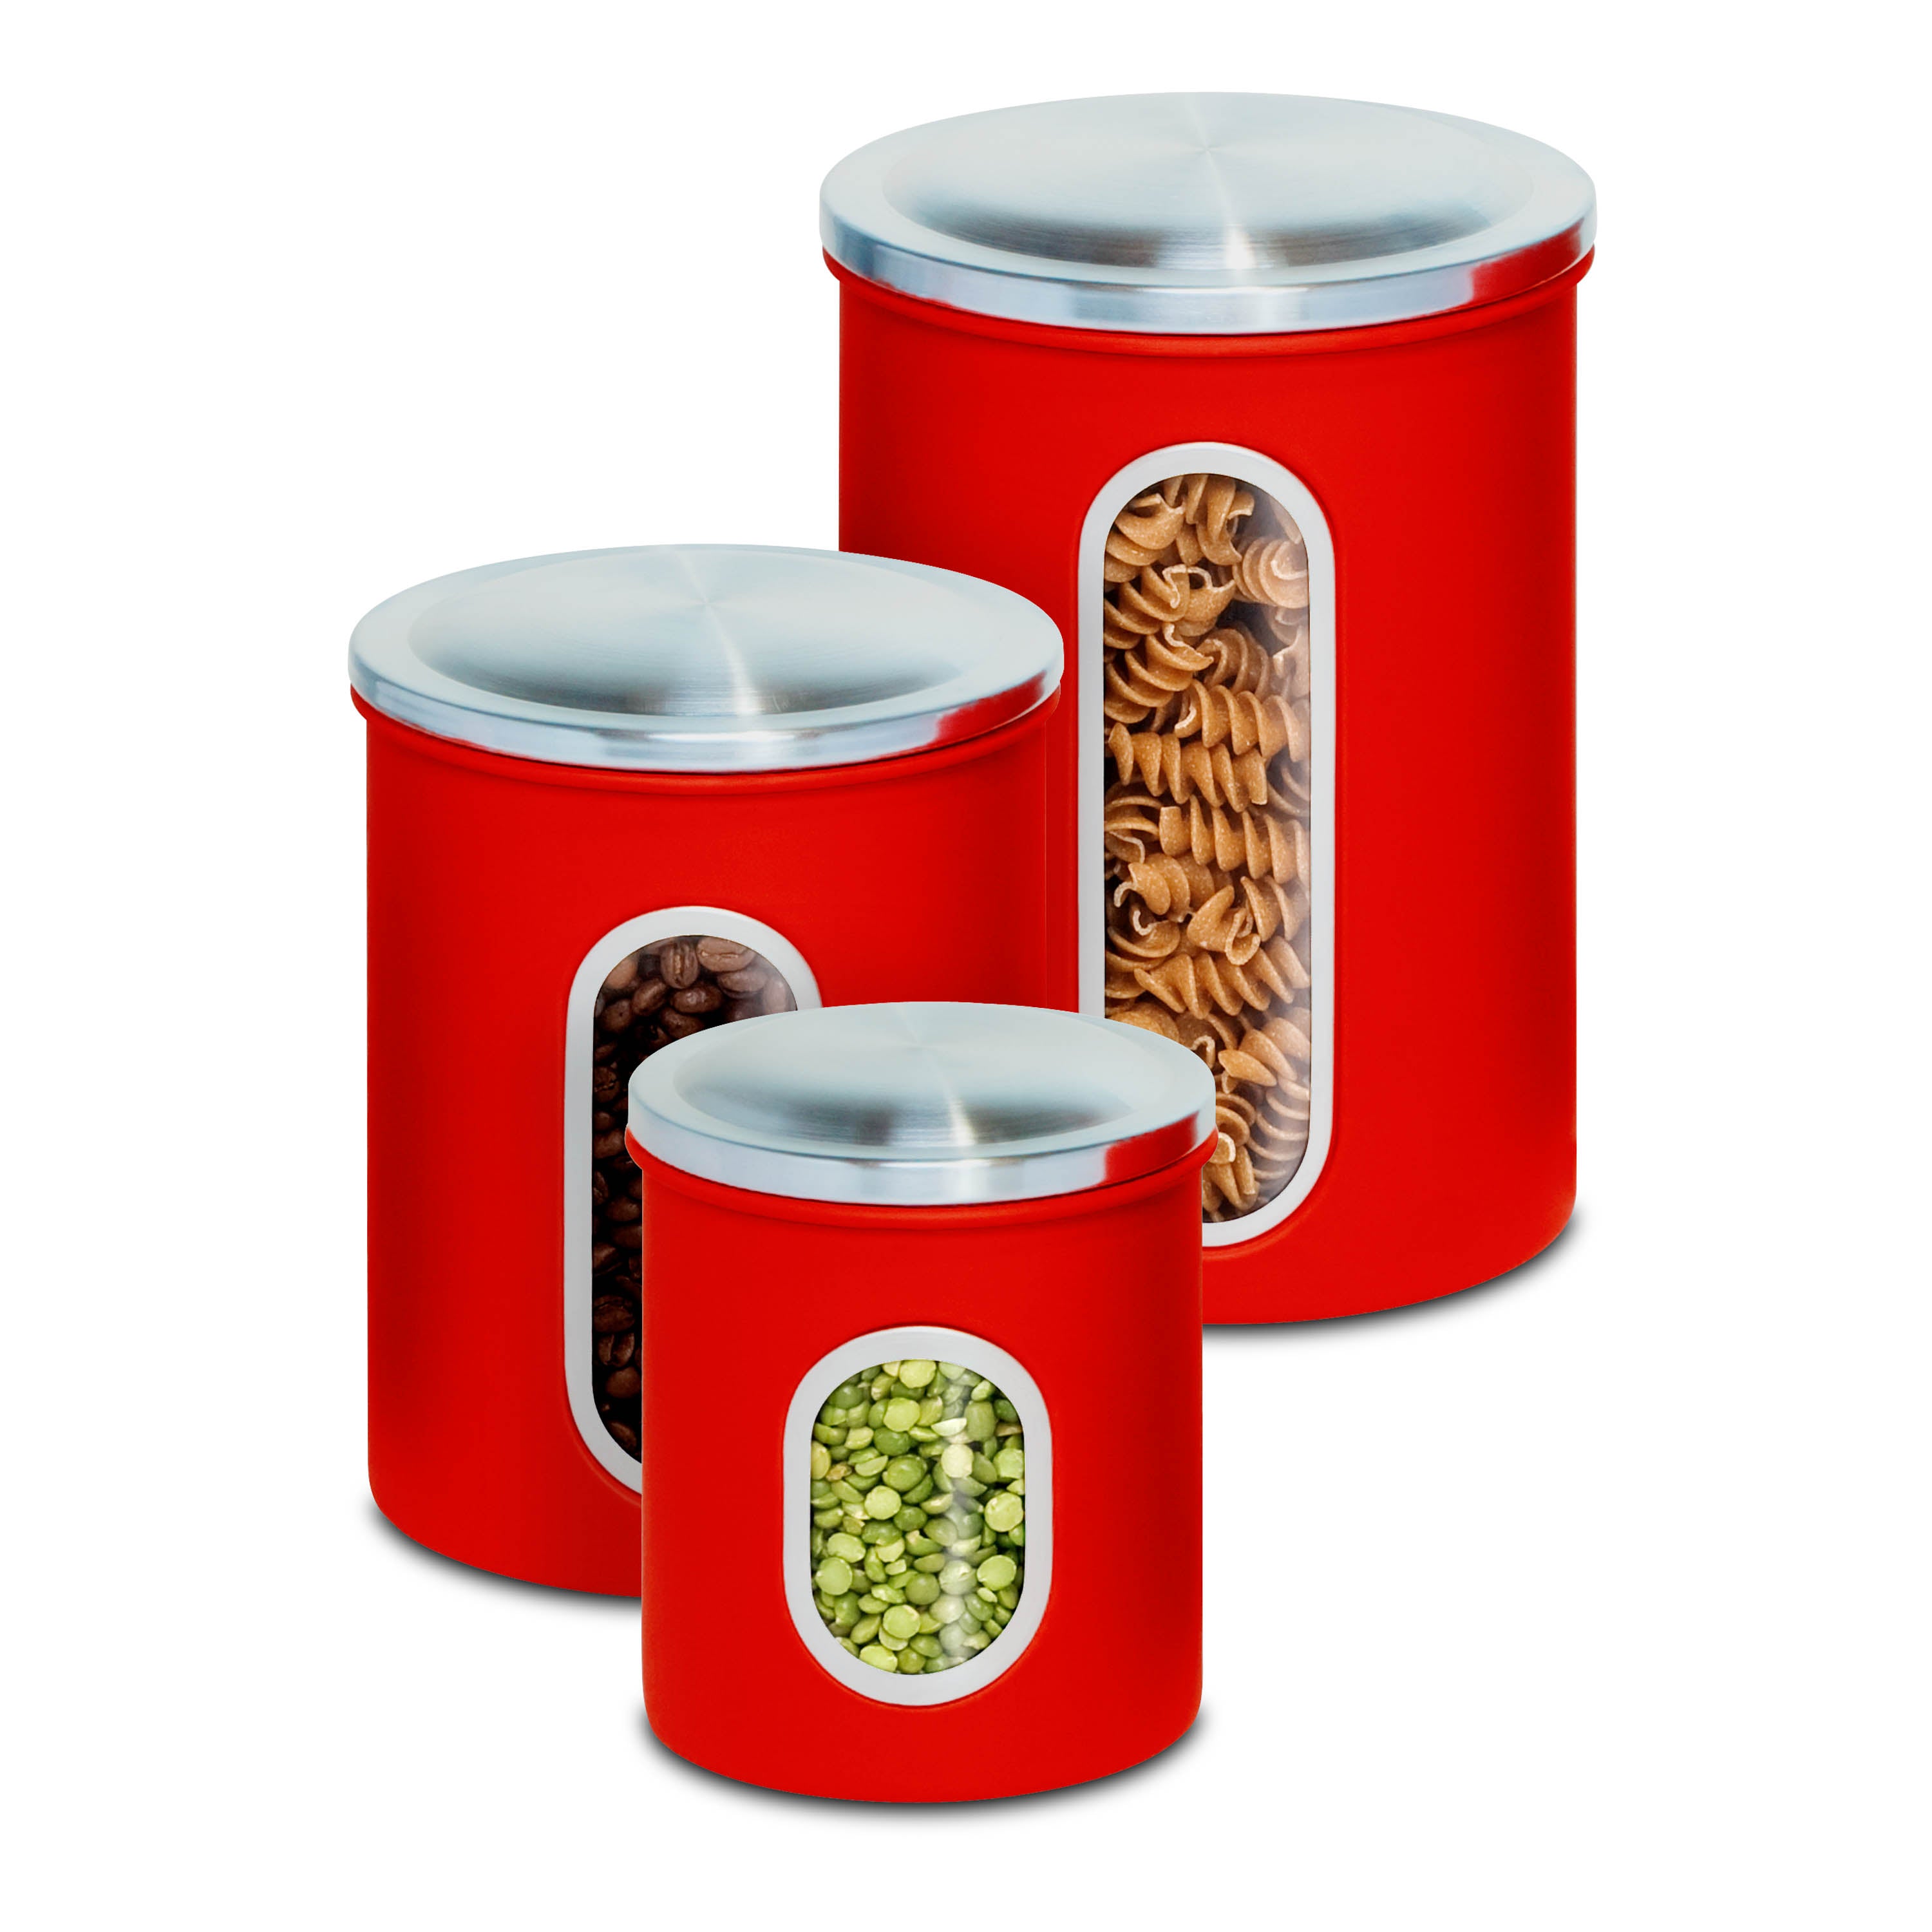 Honey-Can-Do 4-Piece Stainless Steel Canister Set